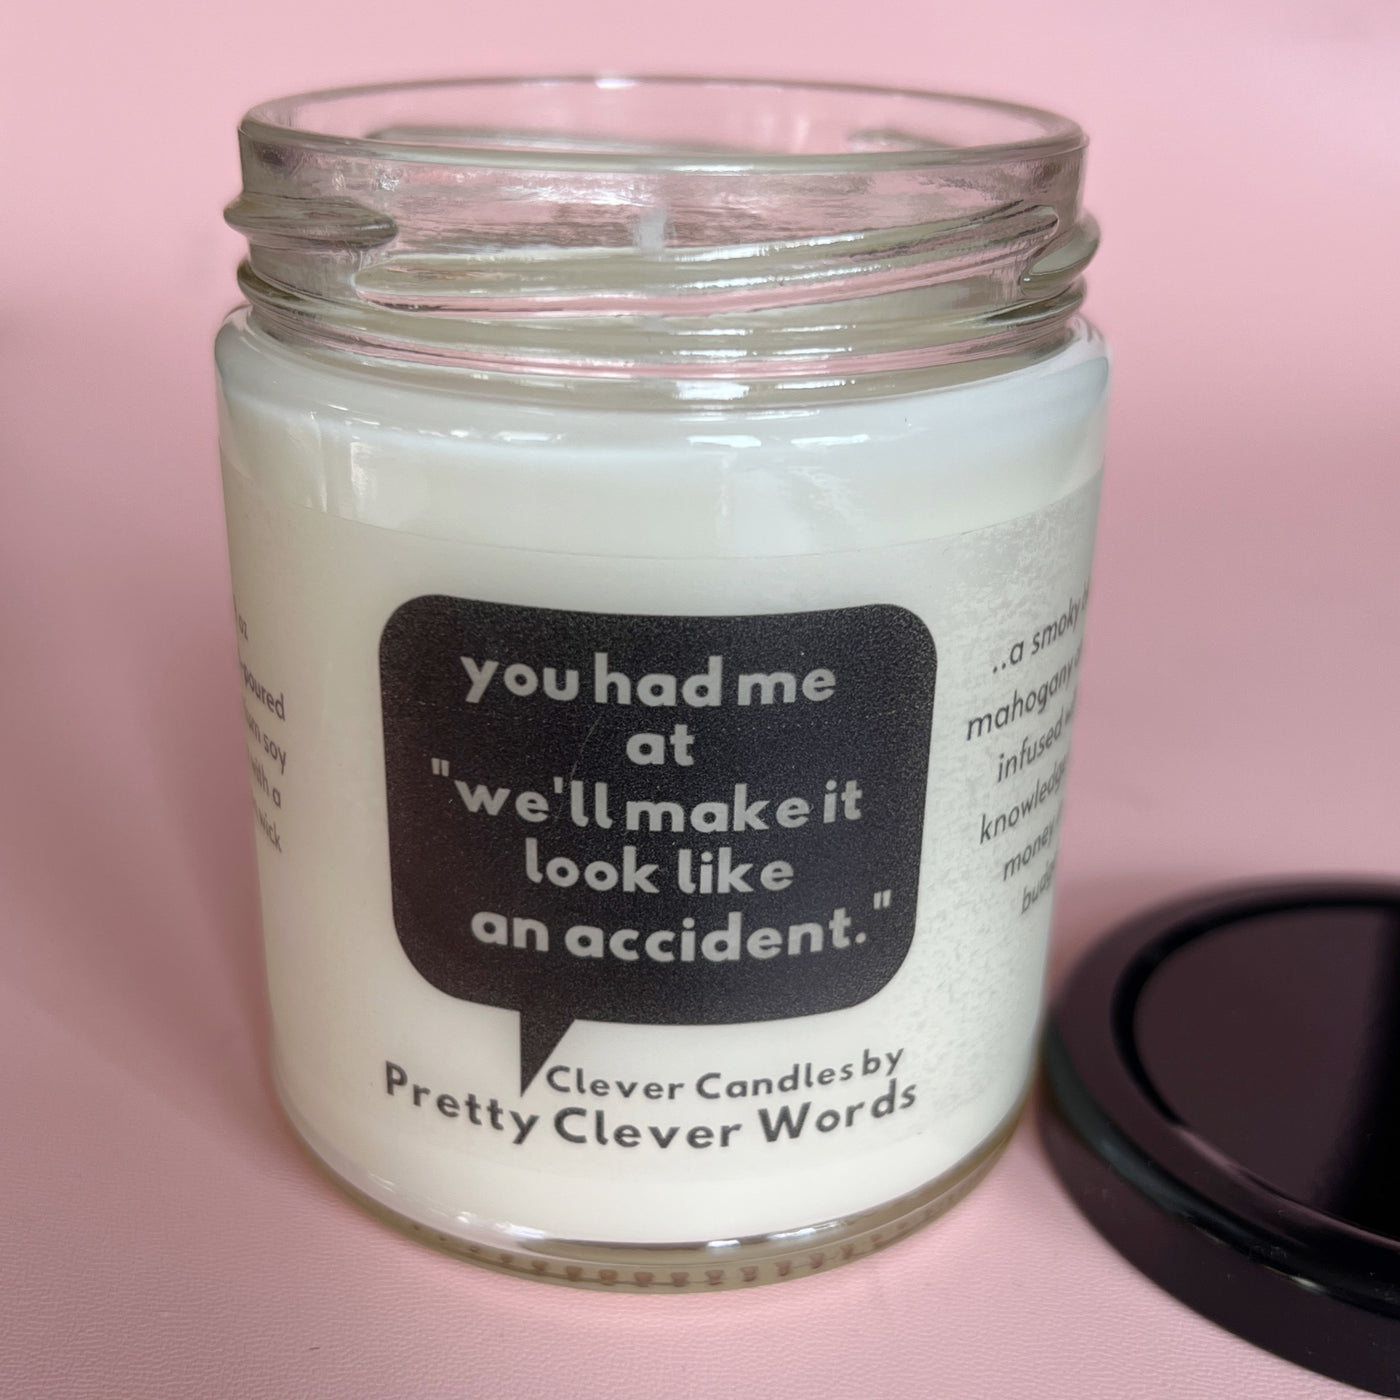 you had me at we'll make it look like an accident word bubble - mahogany teakwood candle